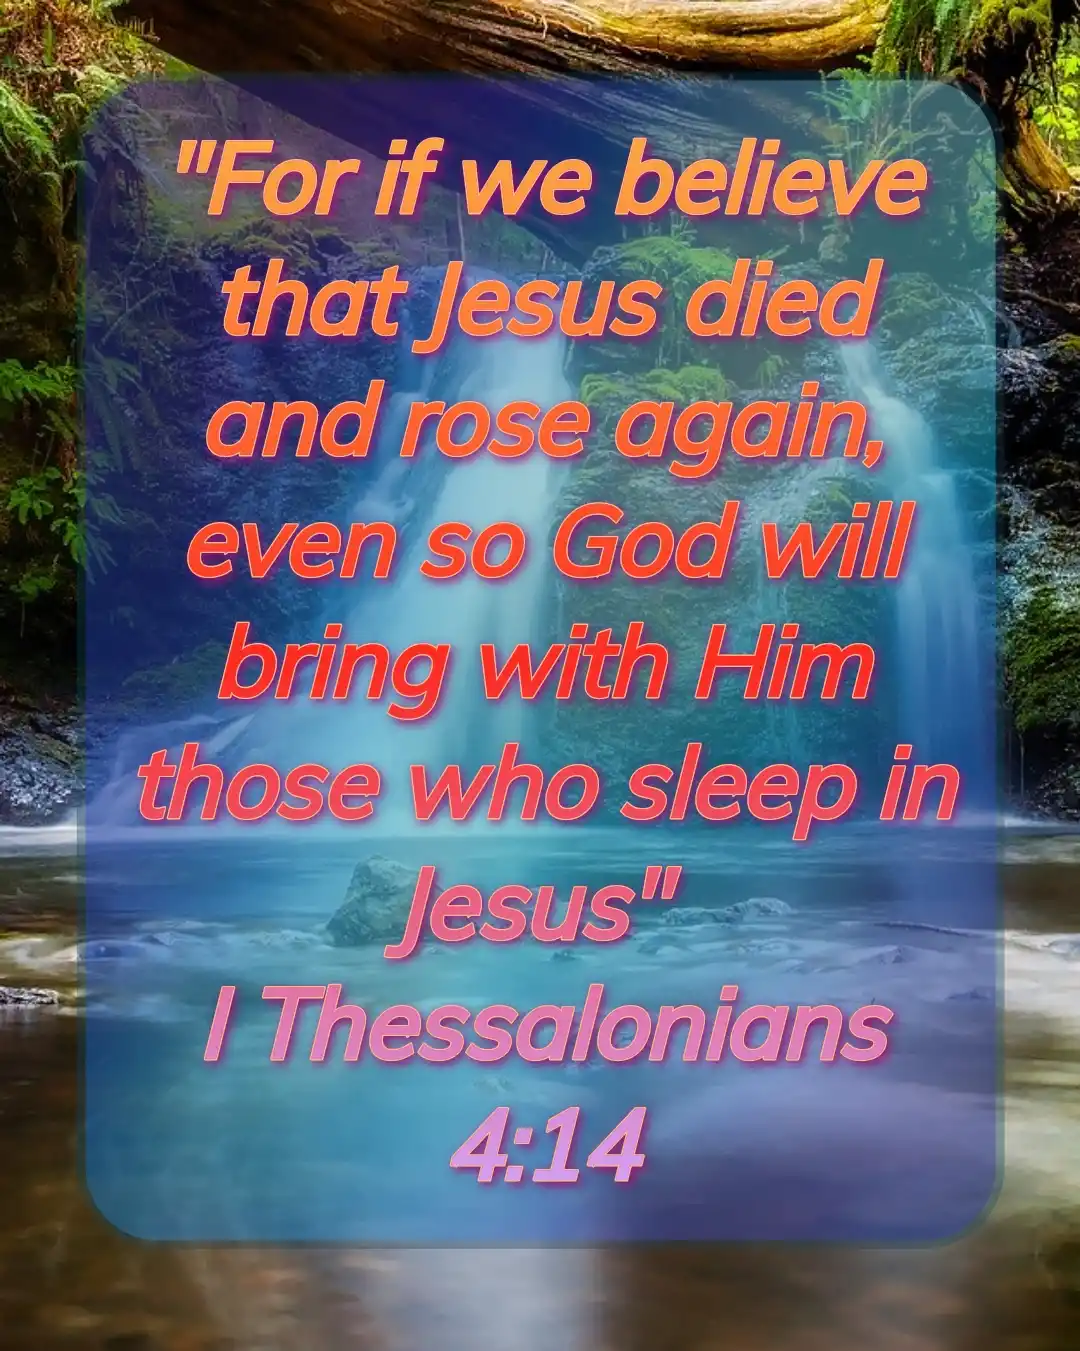 Bible Verses For Resurrection (1 Thessalonians 4:14)